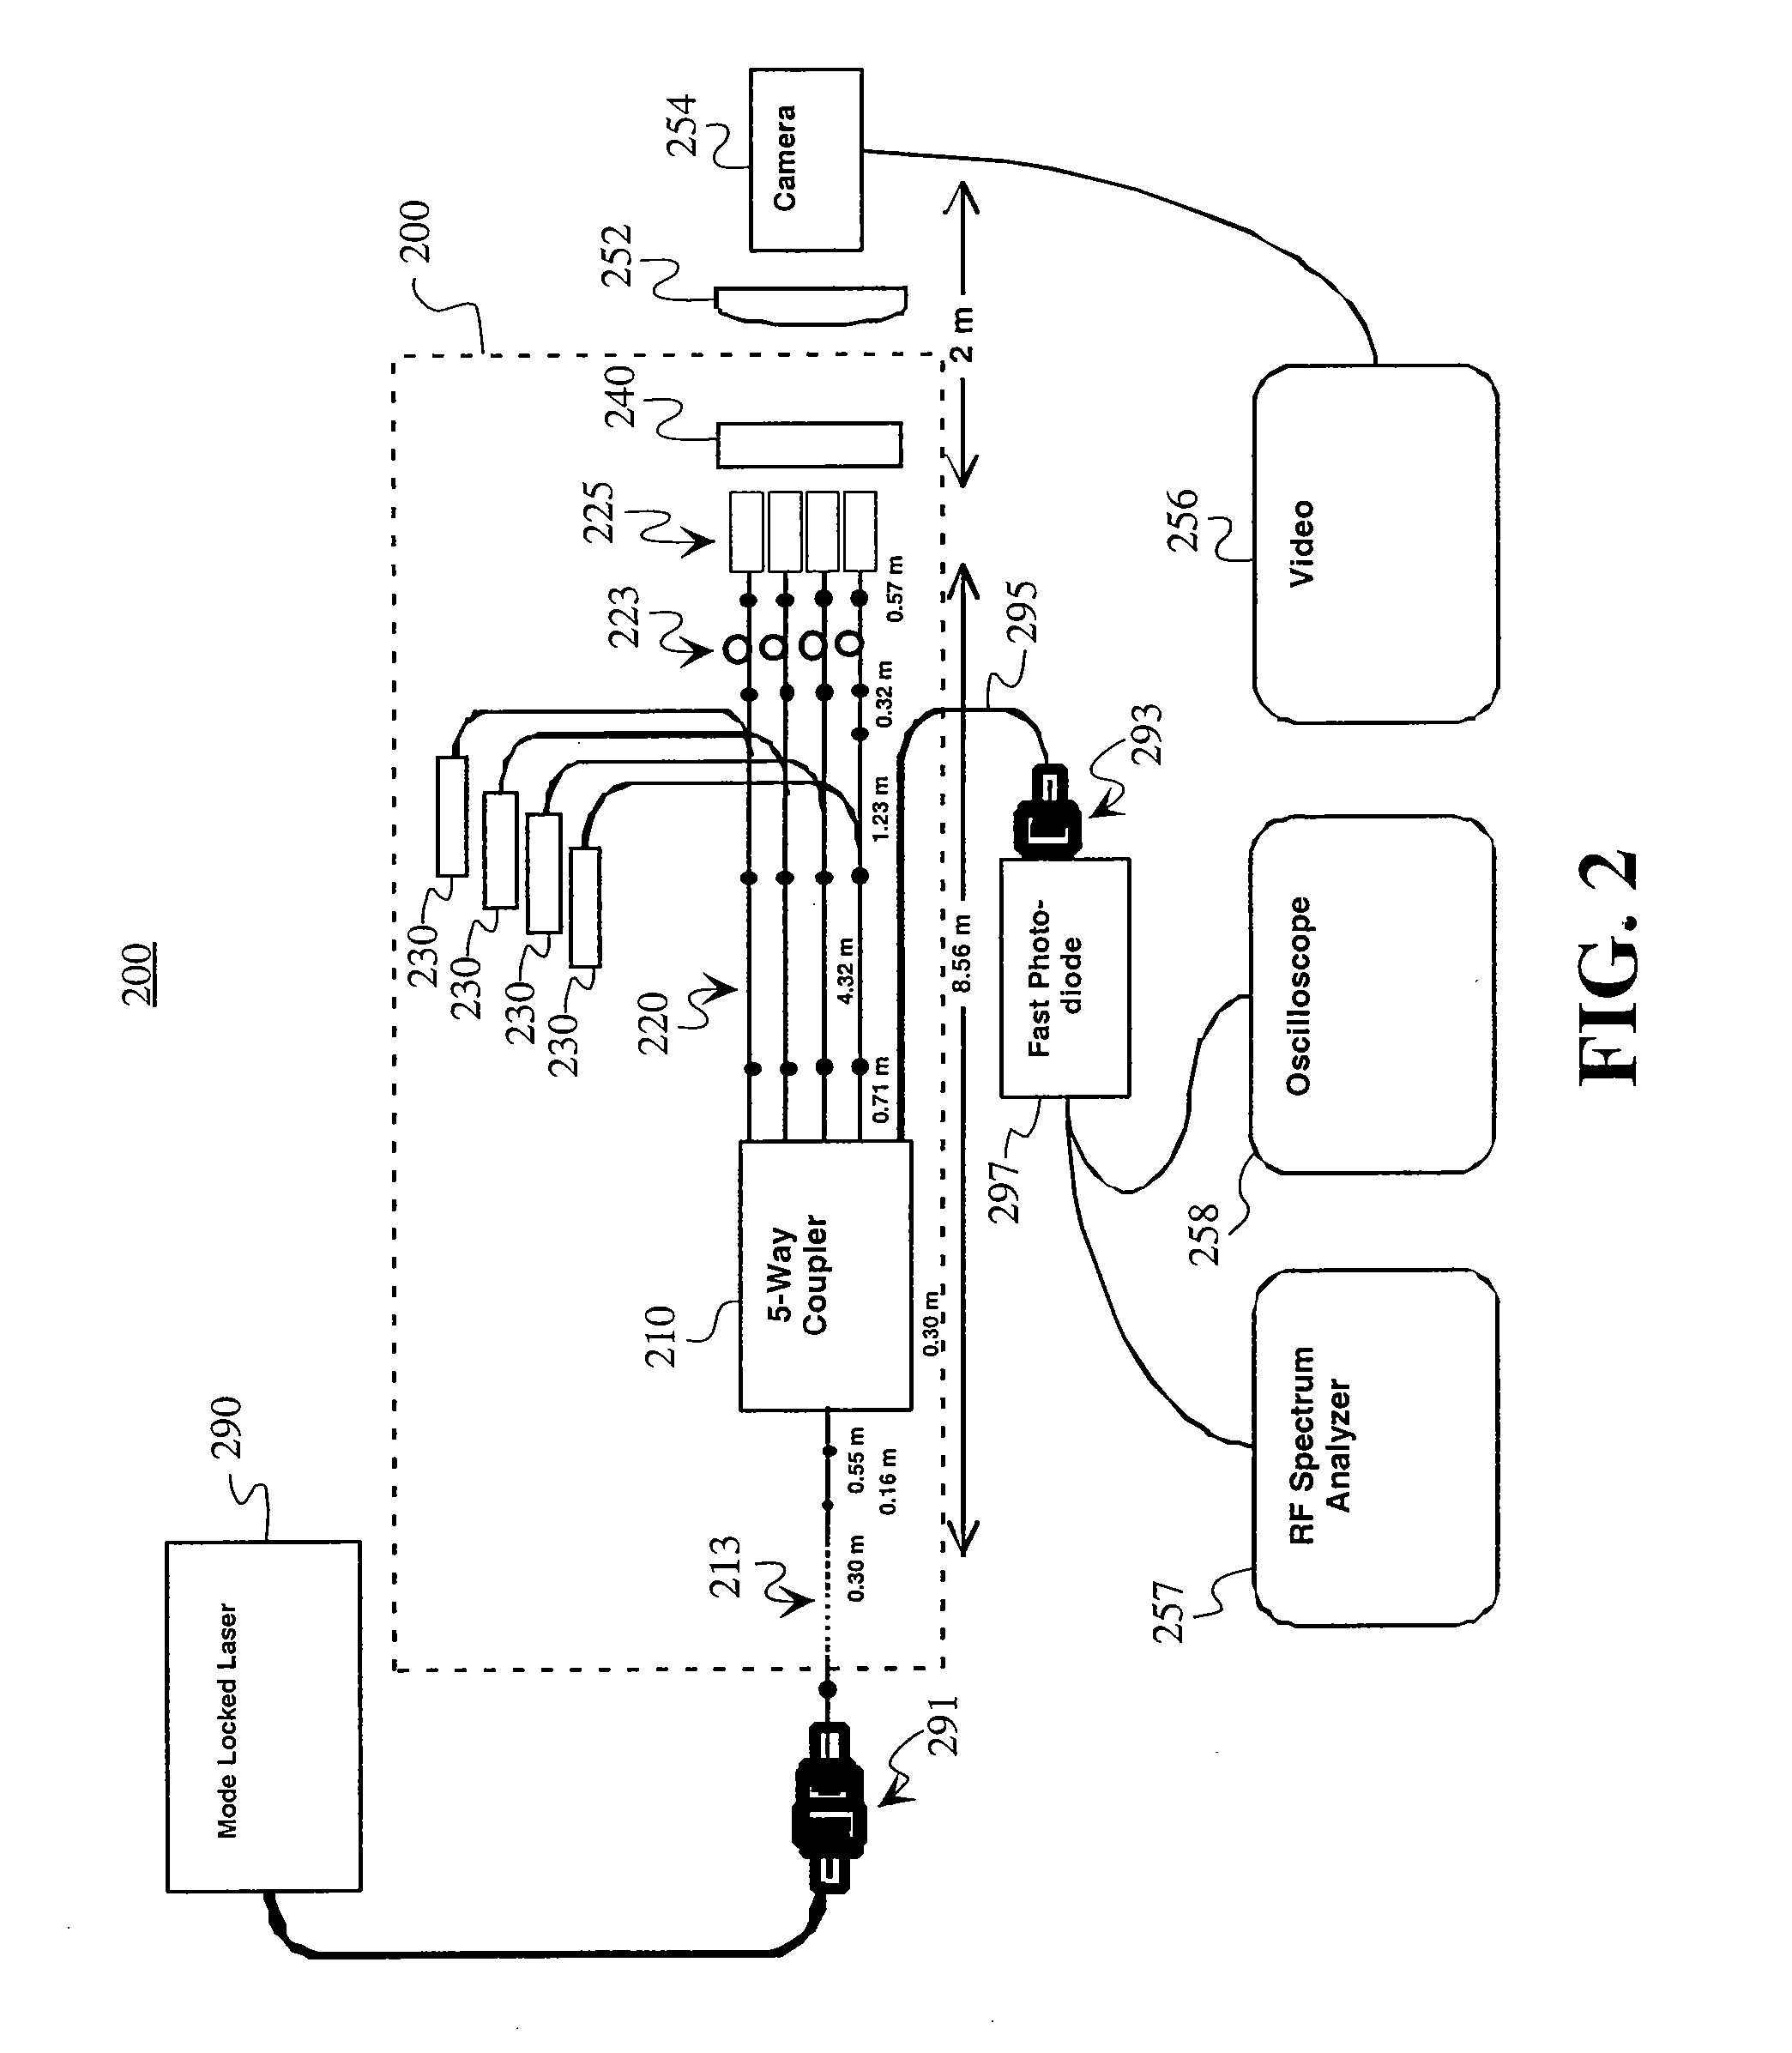 Method and apparatus for coherently combining multiple laser oscillators